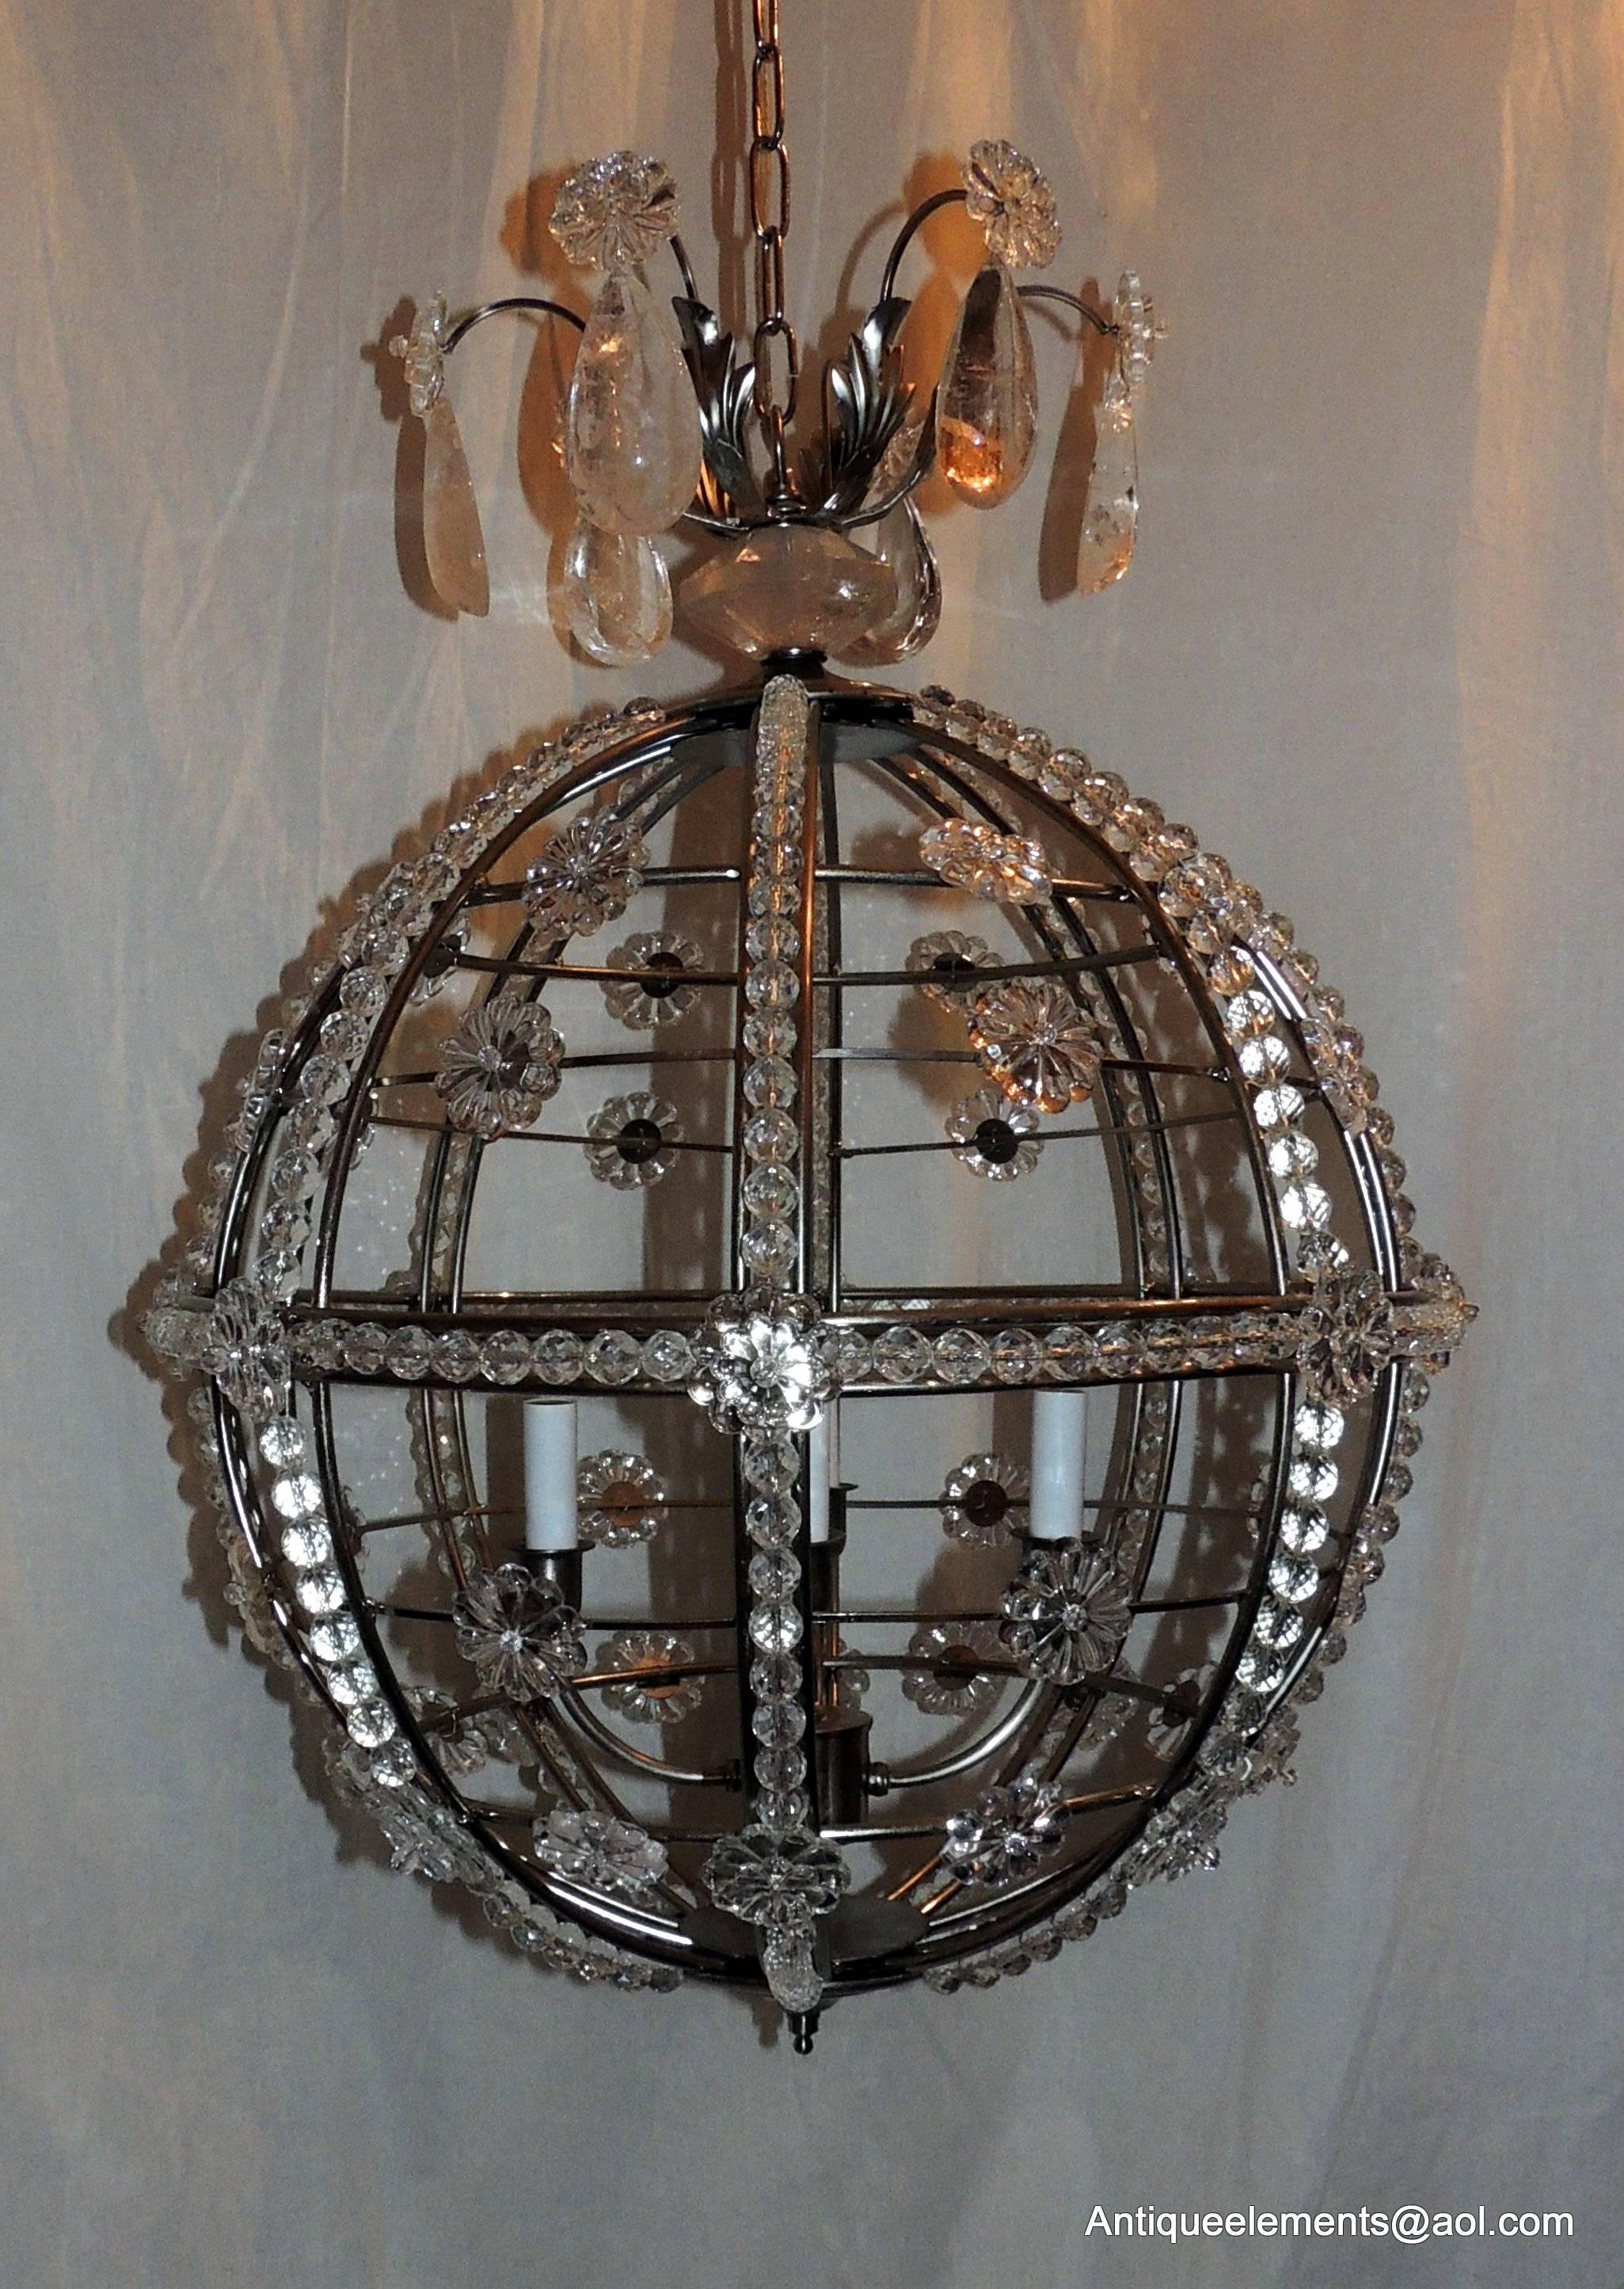 Perfect for the transitional space, this brushed nickel Sputnik style chandelier is detailed with crystal beads and accented with crystal flowers. The flowing rock crystal crown sits atop the beautiful rock crystal prism finishing this wonderful